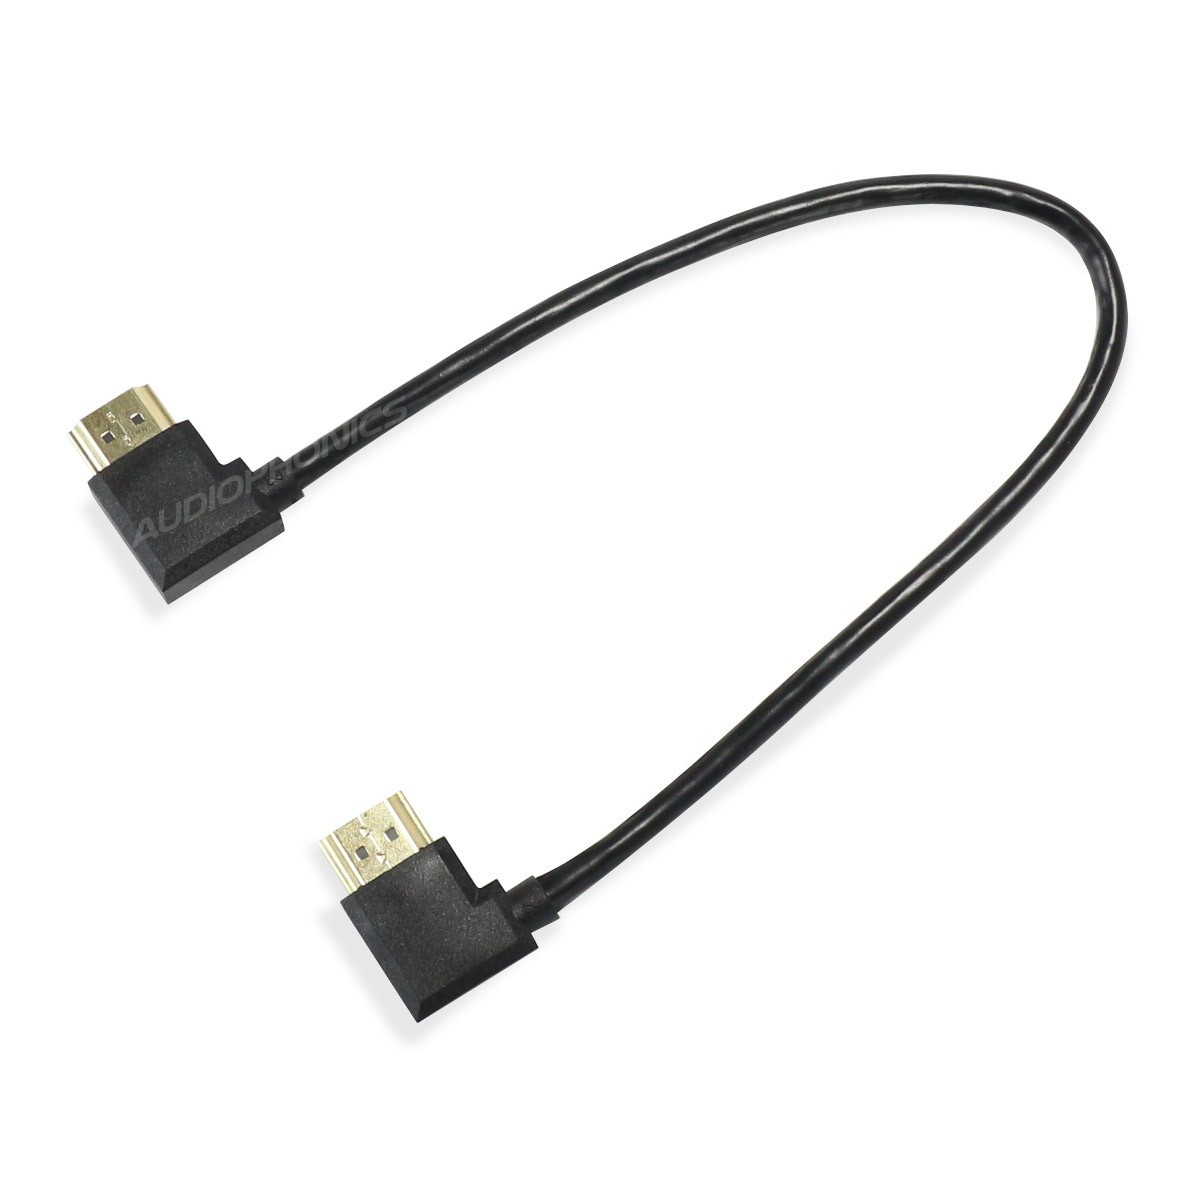 HDMI Cable 1.4 Left Angled Male to Left Angled Male High Speed Ethernet 30cm